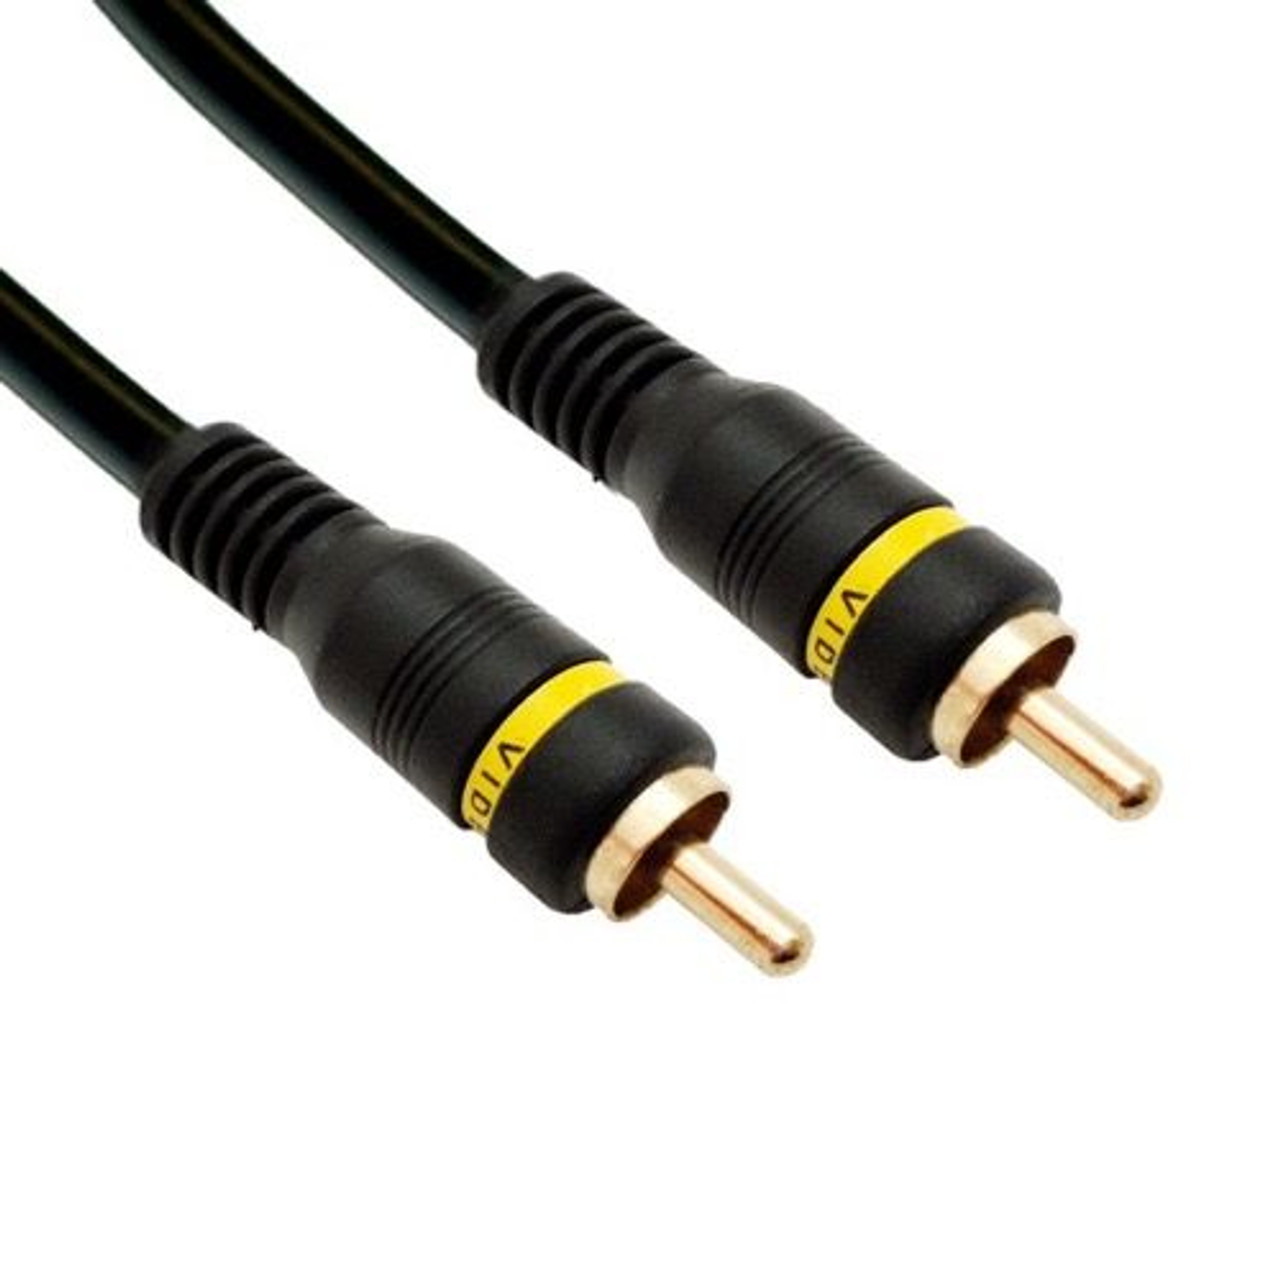 Eagle 12' FT RCA Video Cable Male to Male Python Home Theater Gold Audio Cable Shielded AV Composite Cable TV / VCR Hook-Up Signal Shield with Connectors